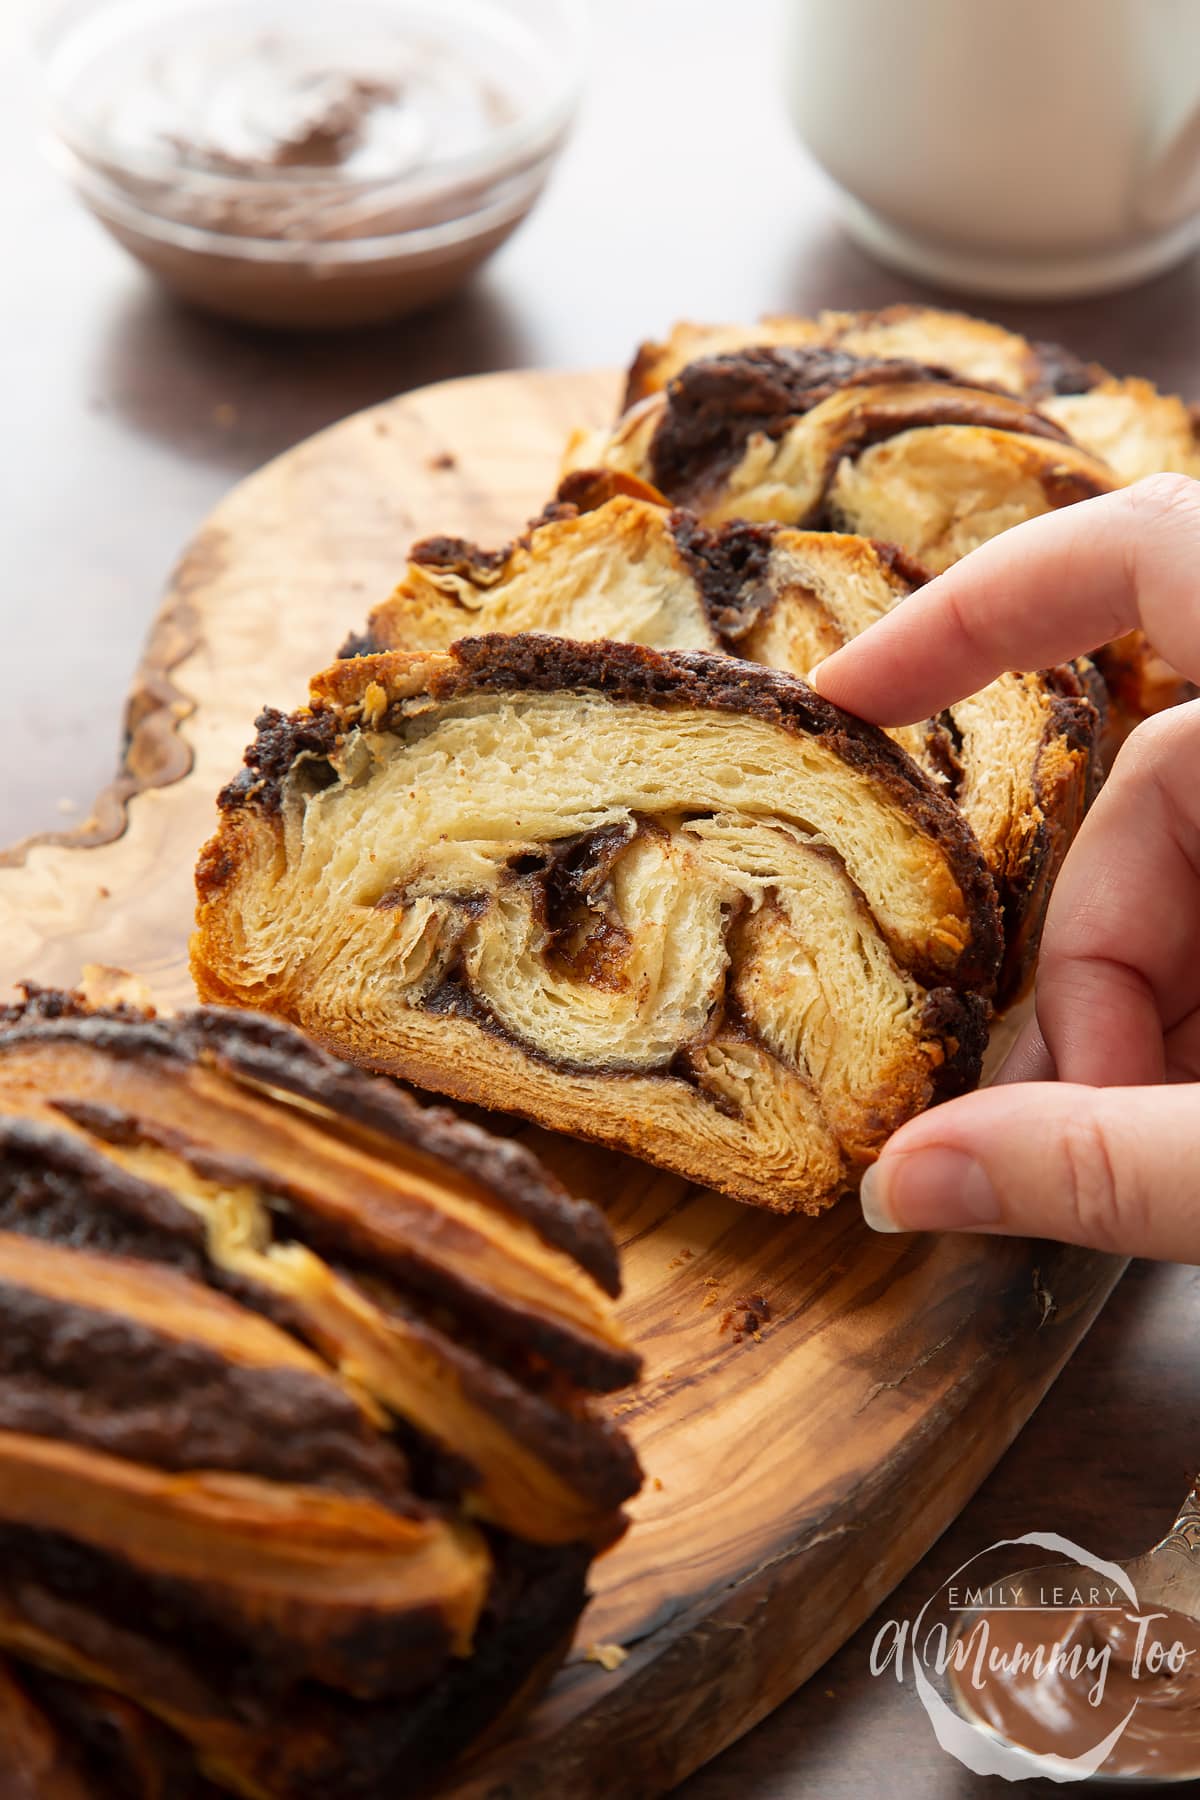 Slices of cinnamon swirl babka on a wooden board. A hand reaches for one.